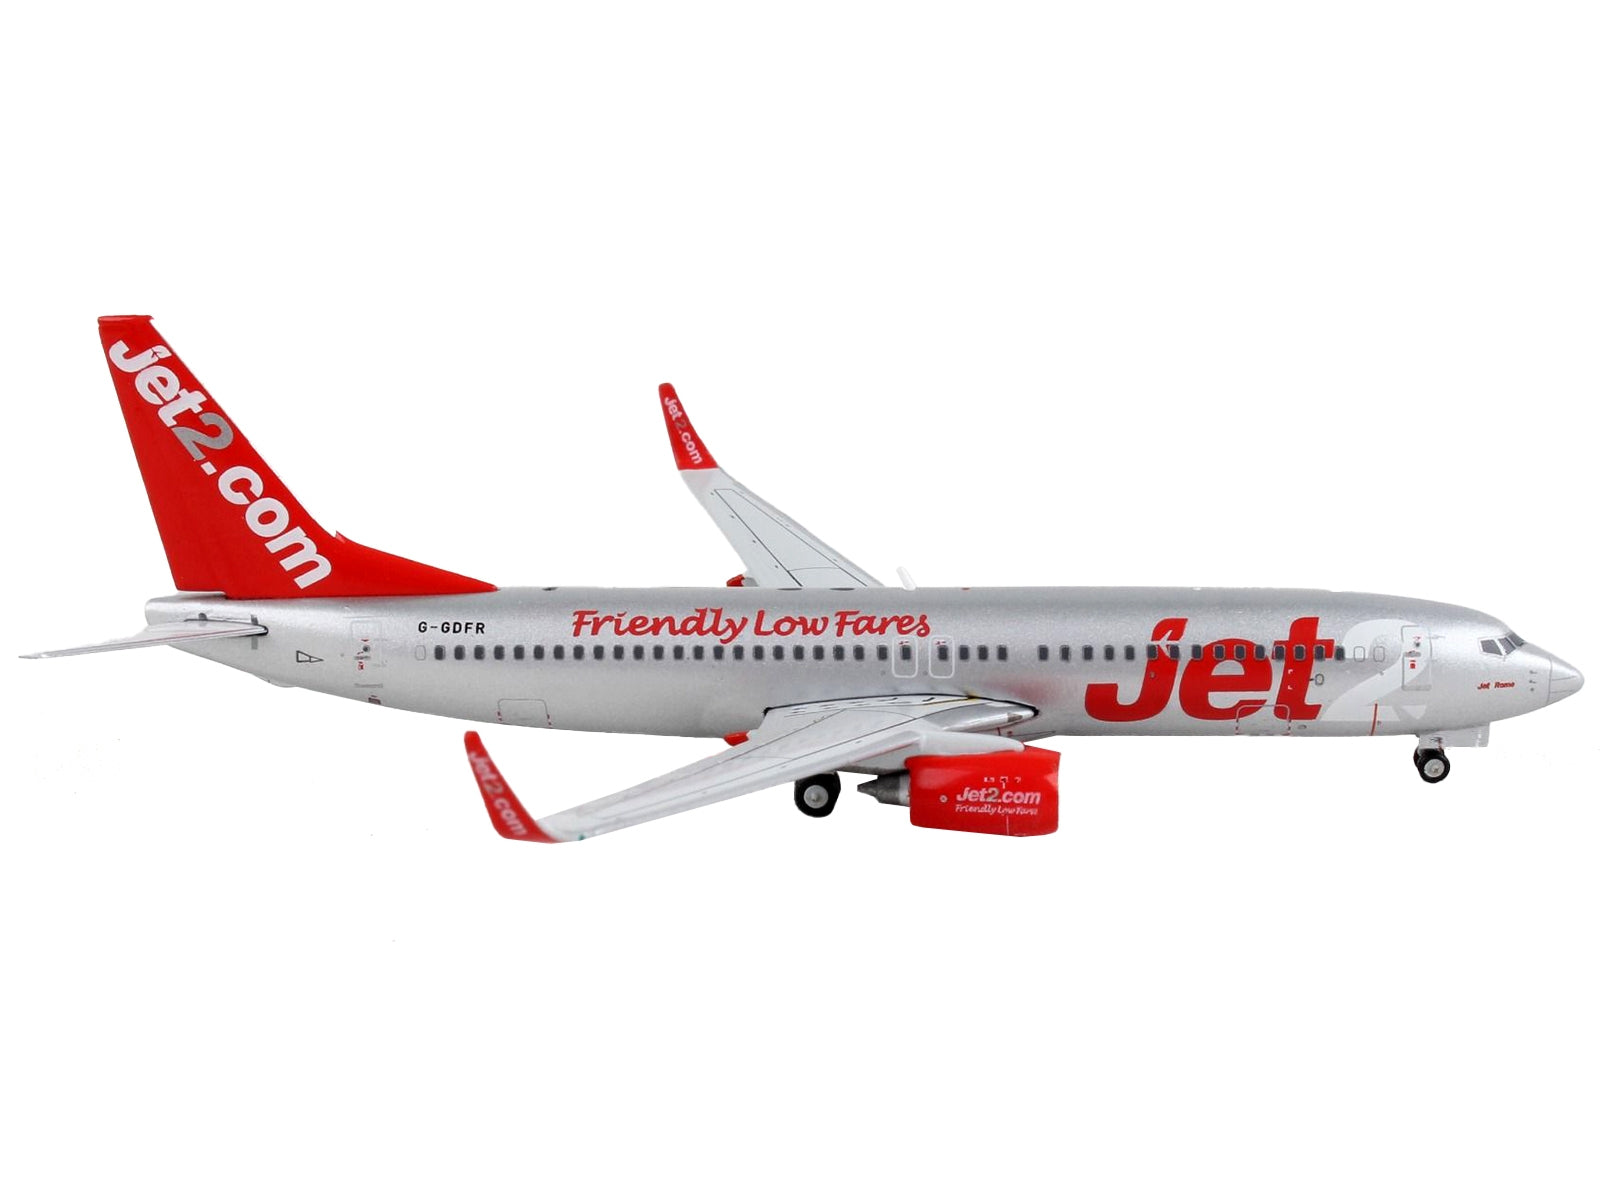 Boeing 737-800 Commercial Aircraft "Jet2.Com" Silver with Red Tail 1/400 Diecast Model Airplane by GeminiJets